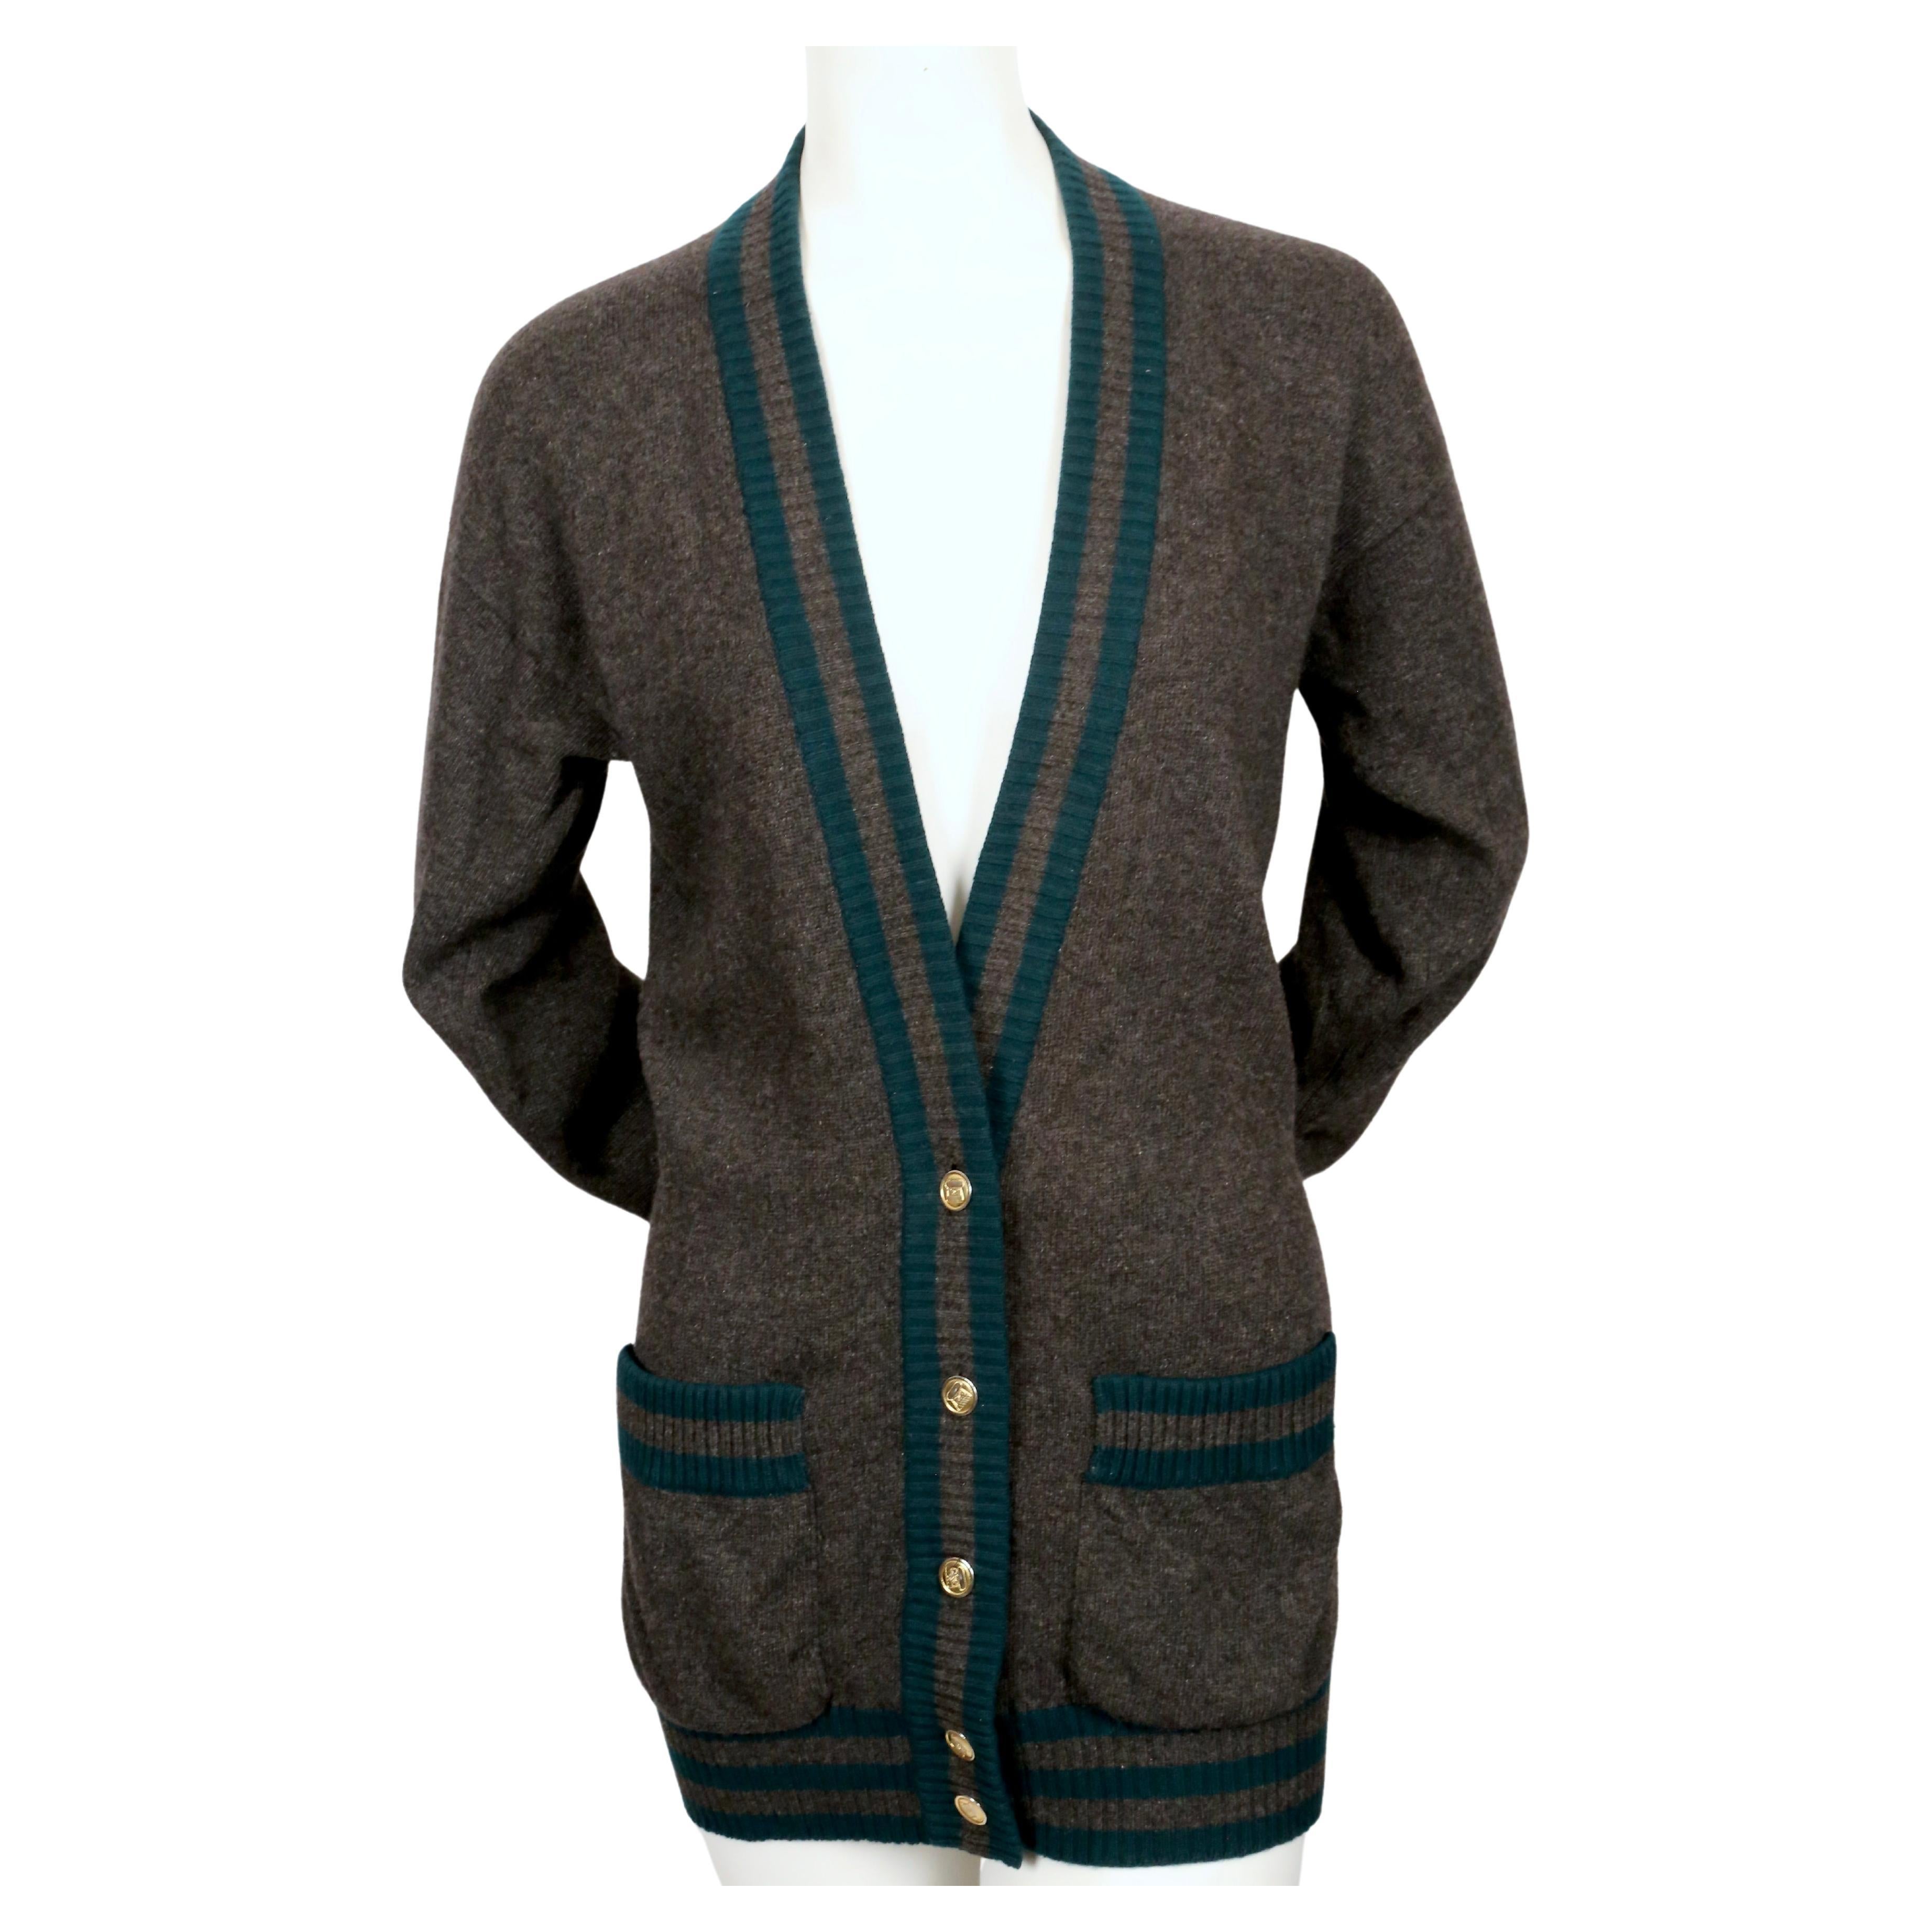 Classic charcoal grey and spruce cashmere cardigan with ribbed striped trip and gilt buttons from Chanel dating to the 1980's. Labeled a size M. Approximate measurements: drop shoulder 20